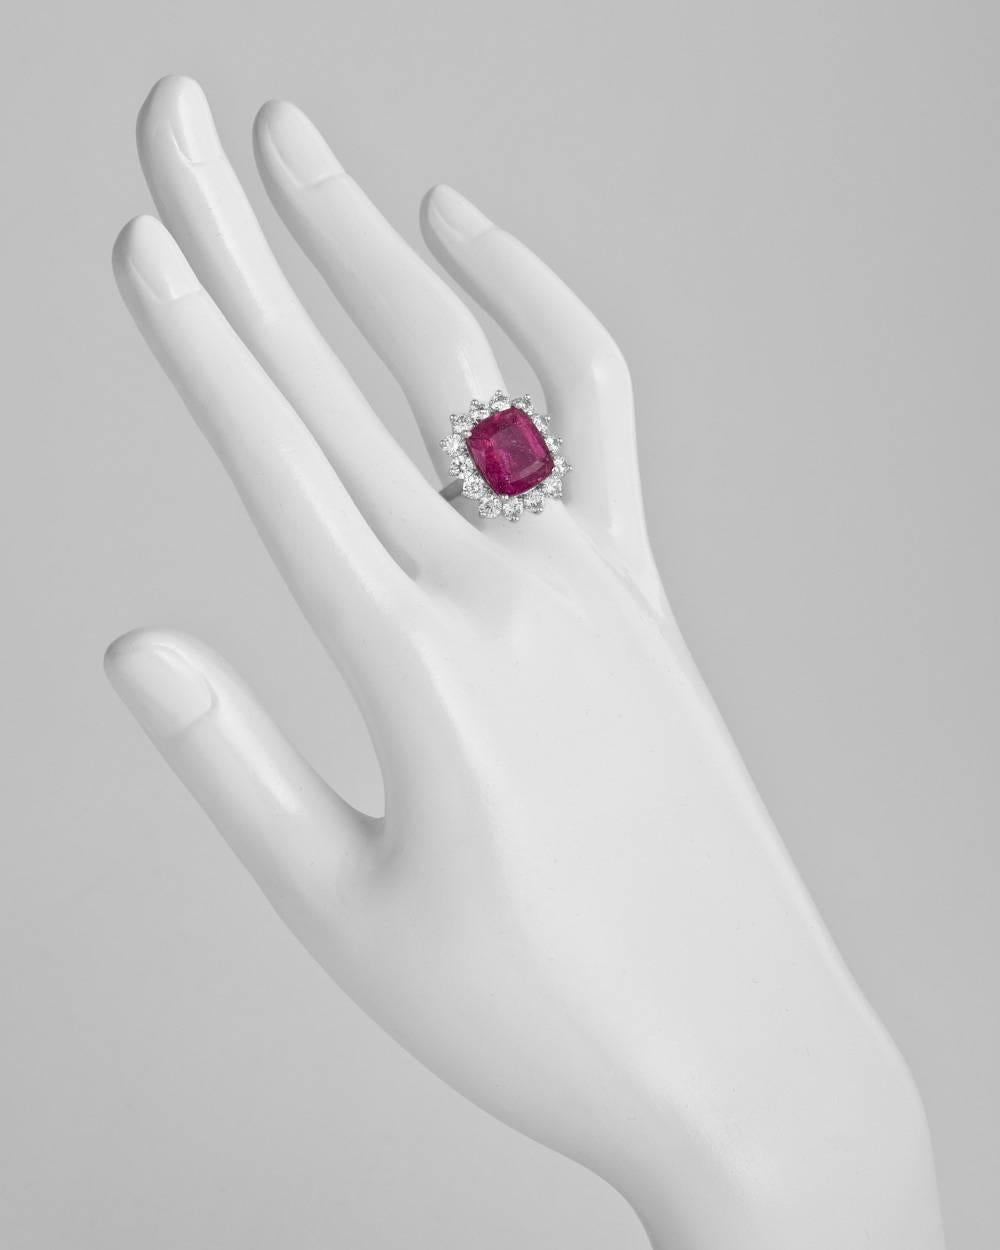 Rubellite and diamond cluster ring, centering a cushion-shaped rubellite weighing 6.99 carats, framed by a diamond surround composed of fourteen round-cut diamonds weighing 2.16 total carats, mounted in platinum. Size 6 (resizable to most ring